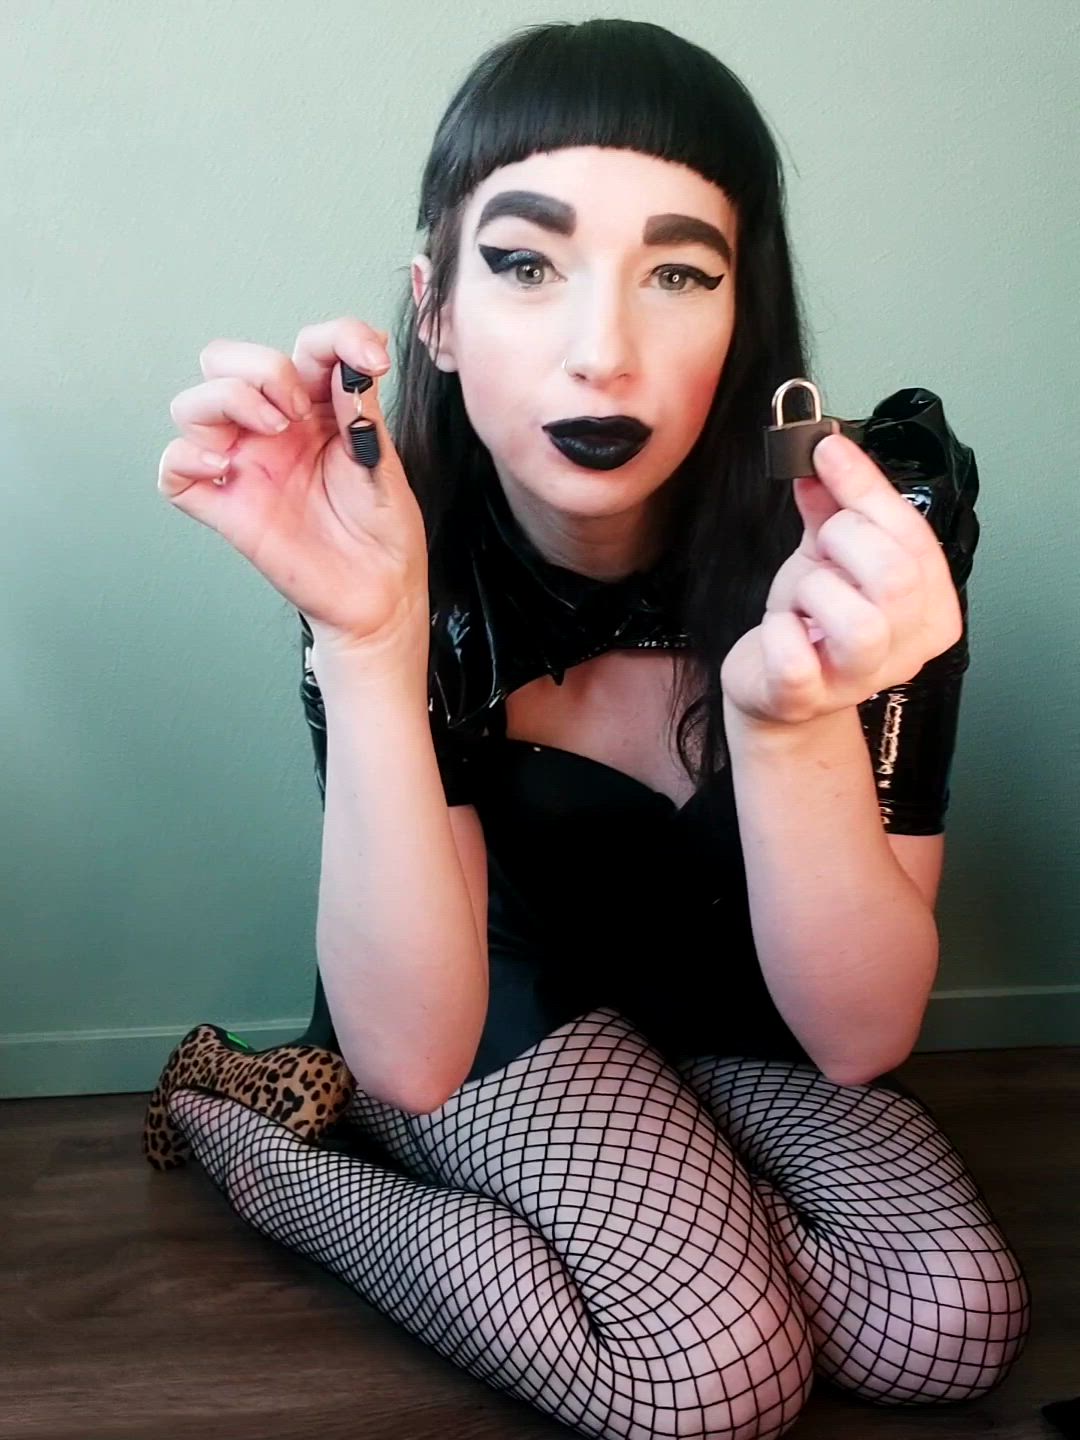 Chastity porn video with onlyfans model ladystardust333 <strong>@ladystardust33</strong>